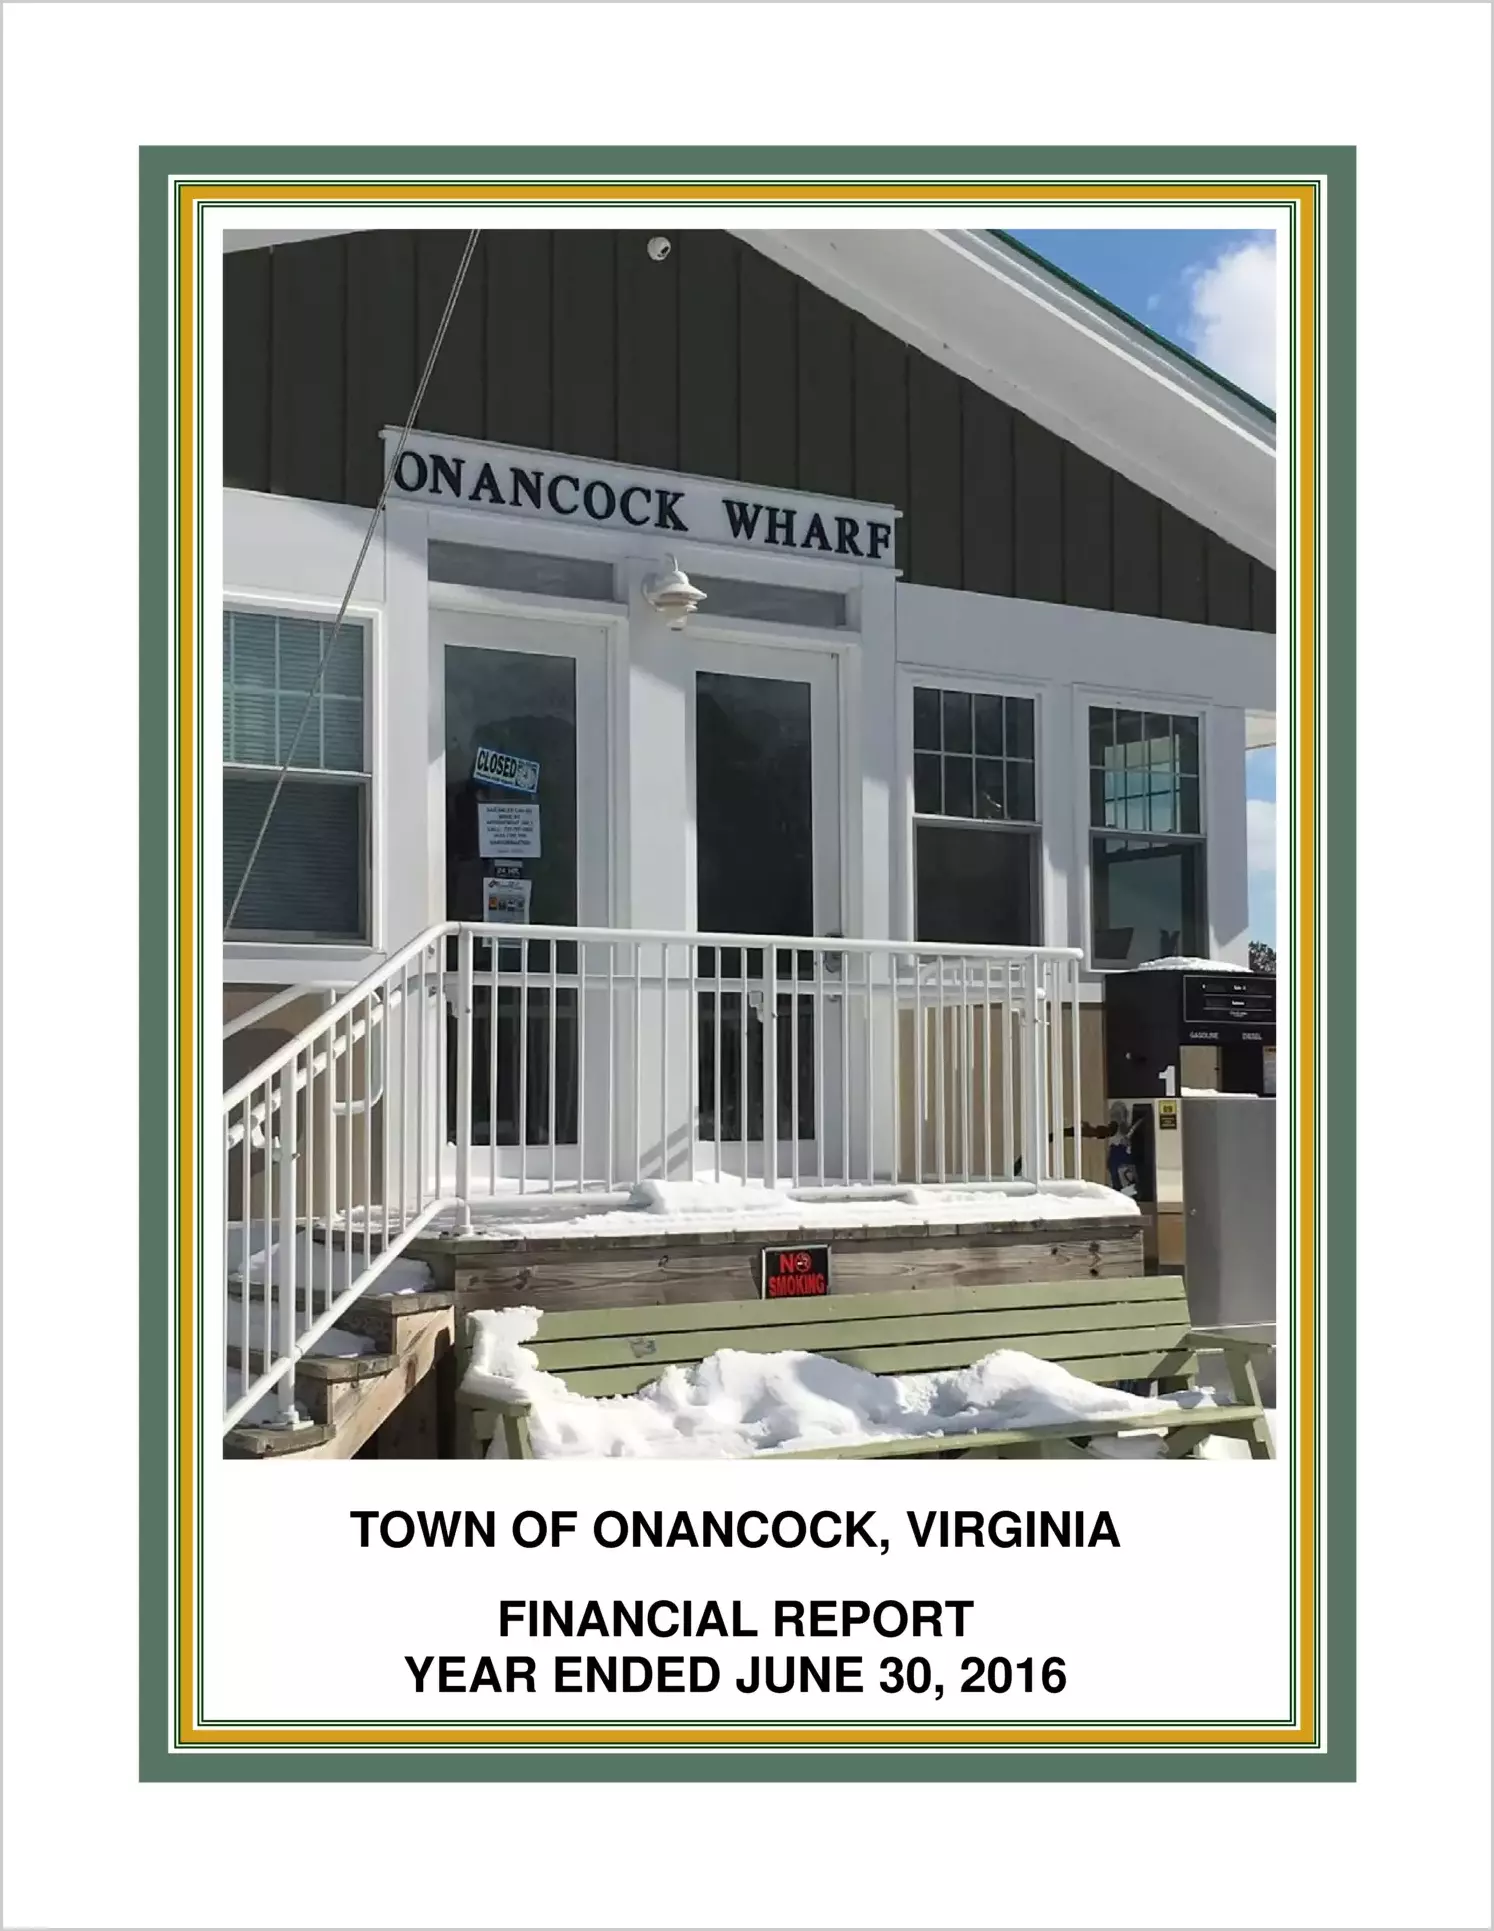 2016 Annual Financial Report for Town of Onancock